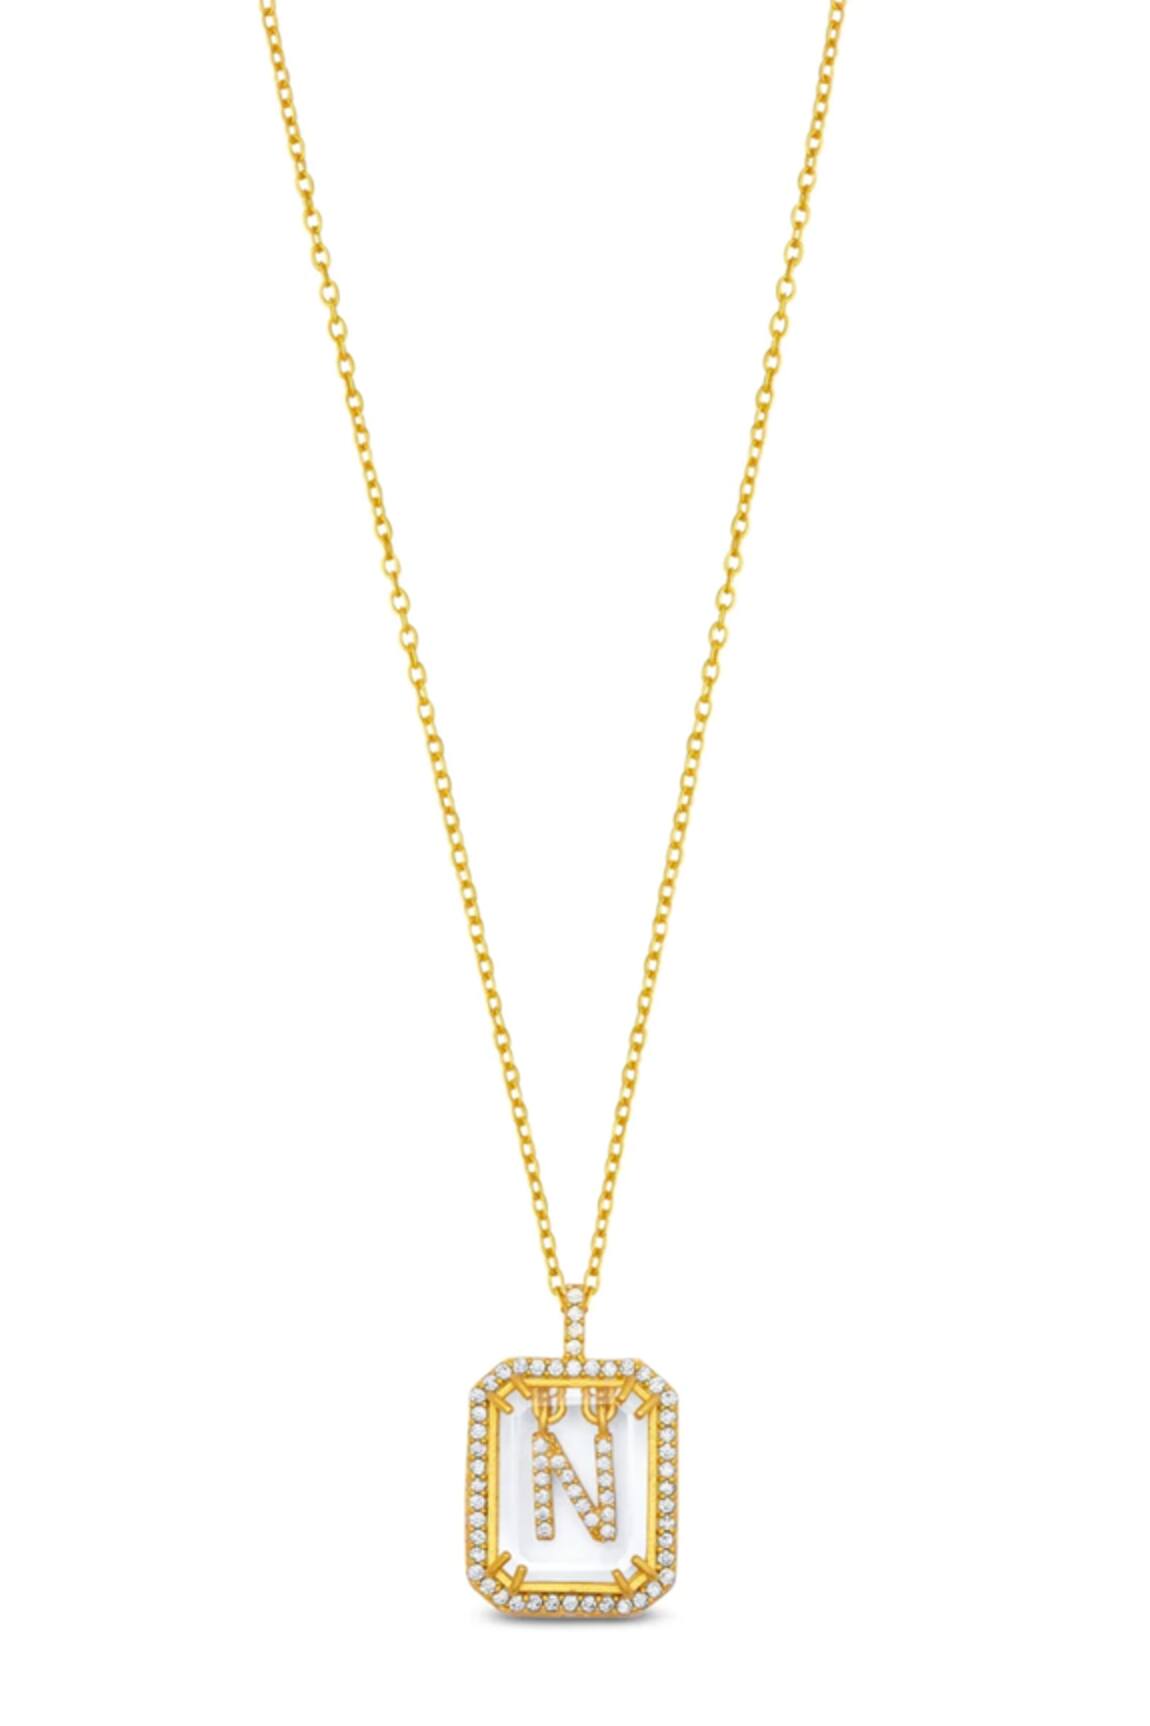 9ct Gold Letter Charm Necklace | Posh Totty Designs